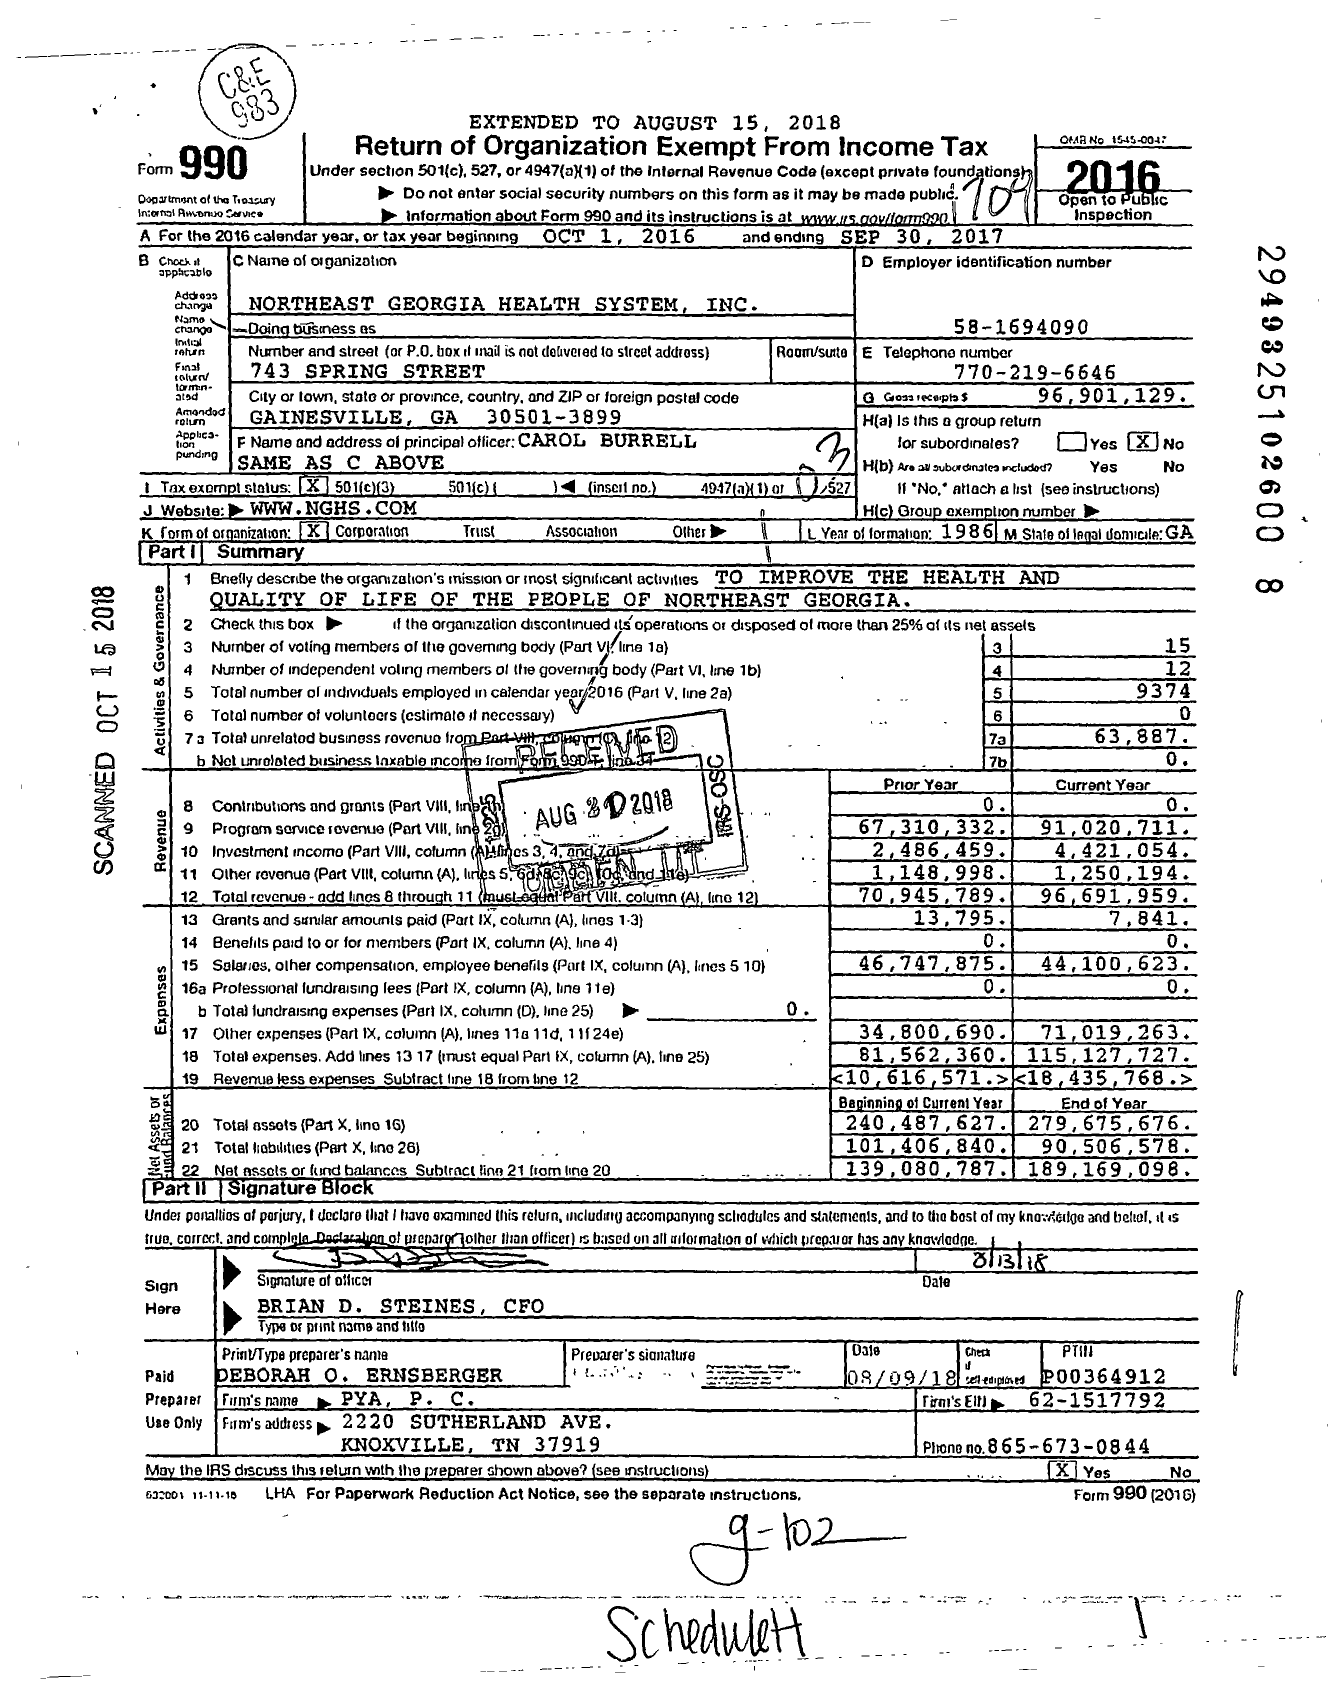 Image of first page of 2016 Form 990 for Northeast Georgia Health System (NGHS)